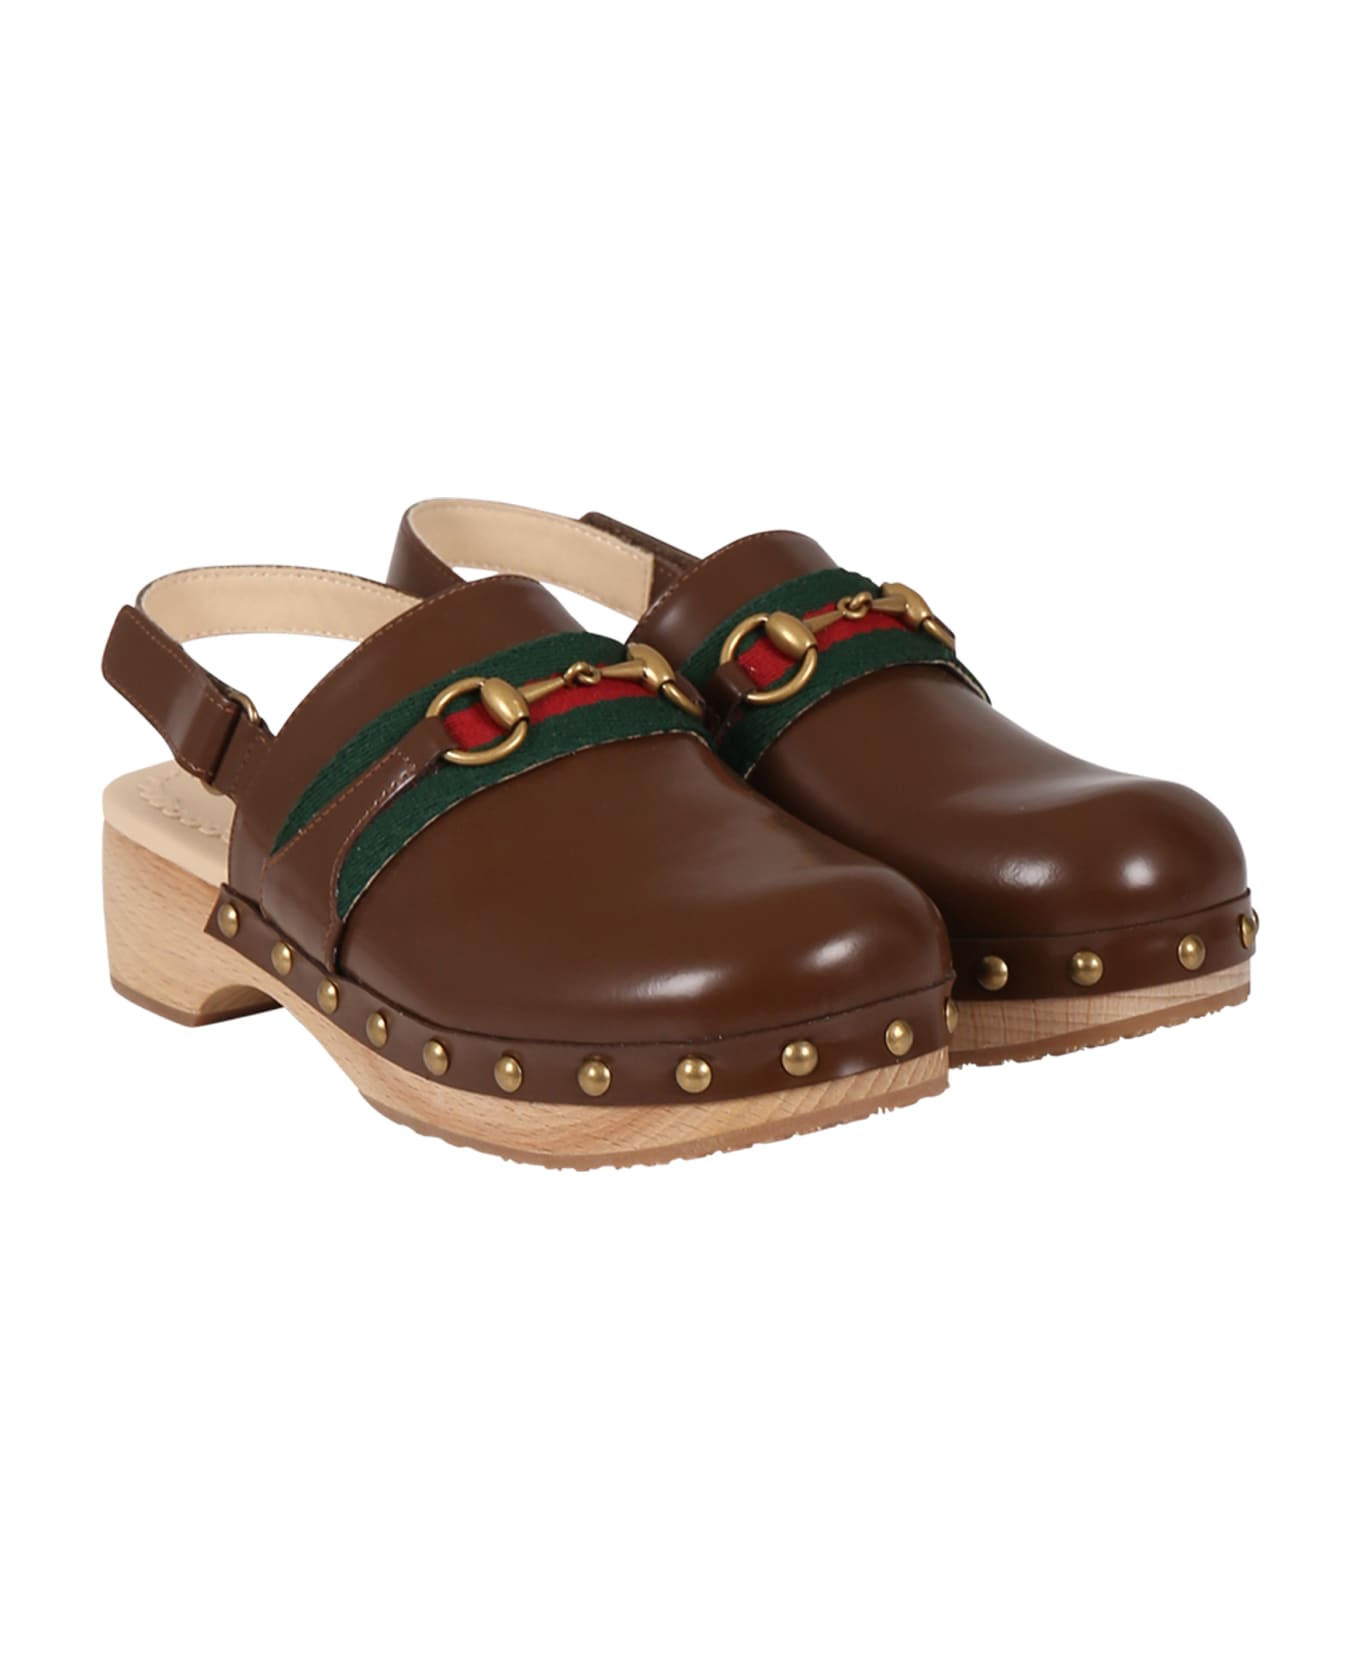 Gucci Bown Sabot For Girl With Iconic Horsebit - Brown